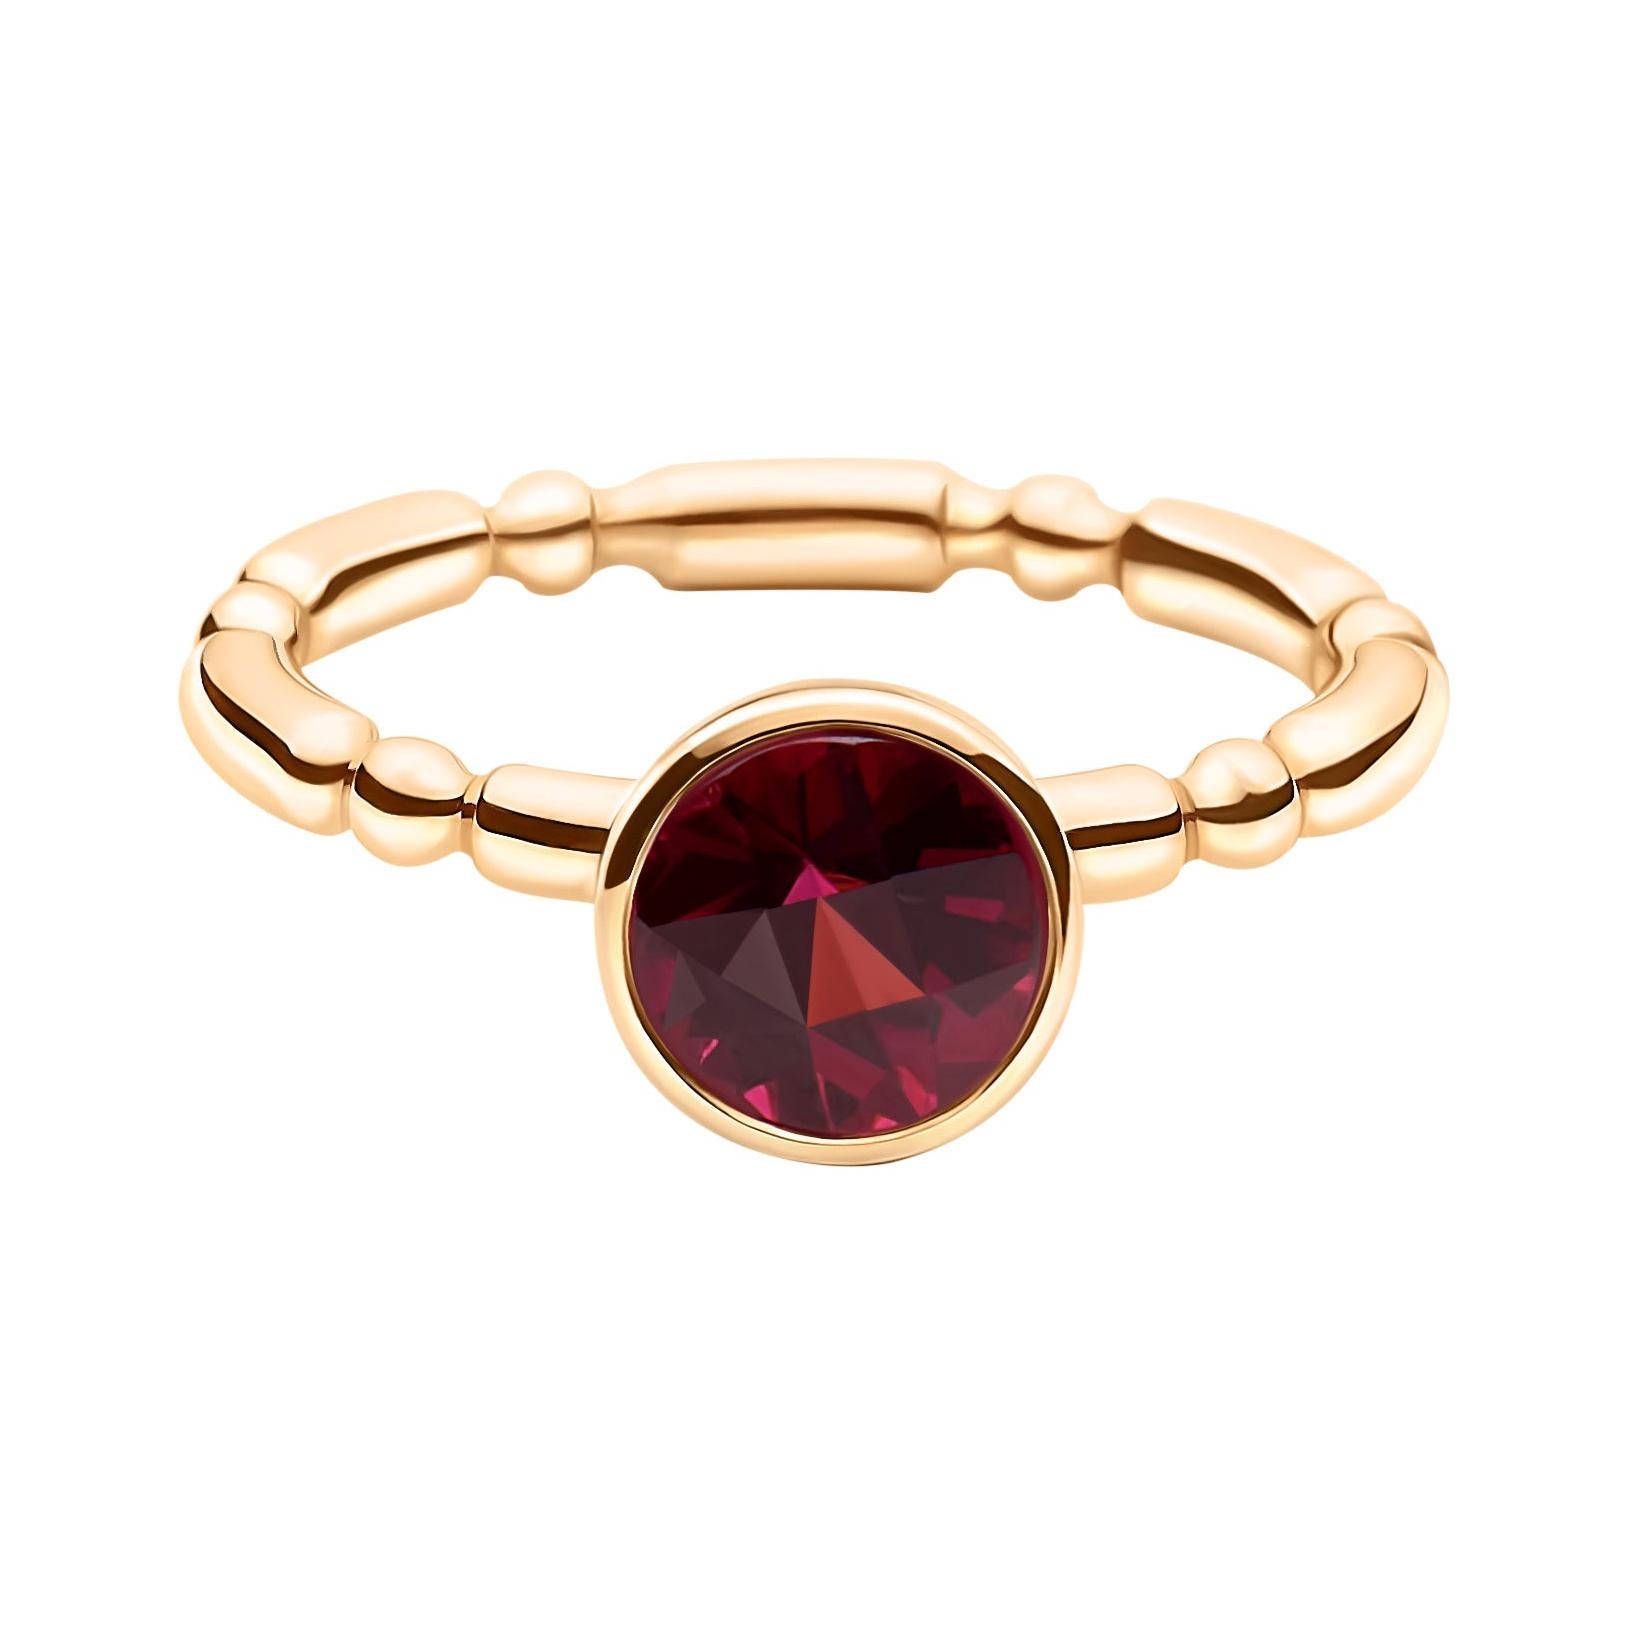 For Sale:  14k Rose Gold Solitaire Engagement Ring with 1.65 Ct Round Red Rhodolite Garnet